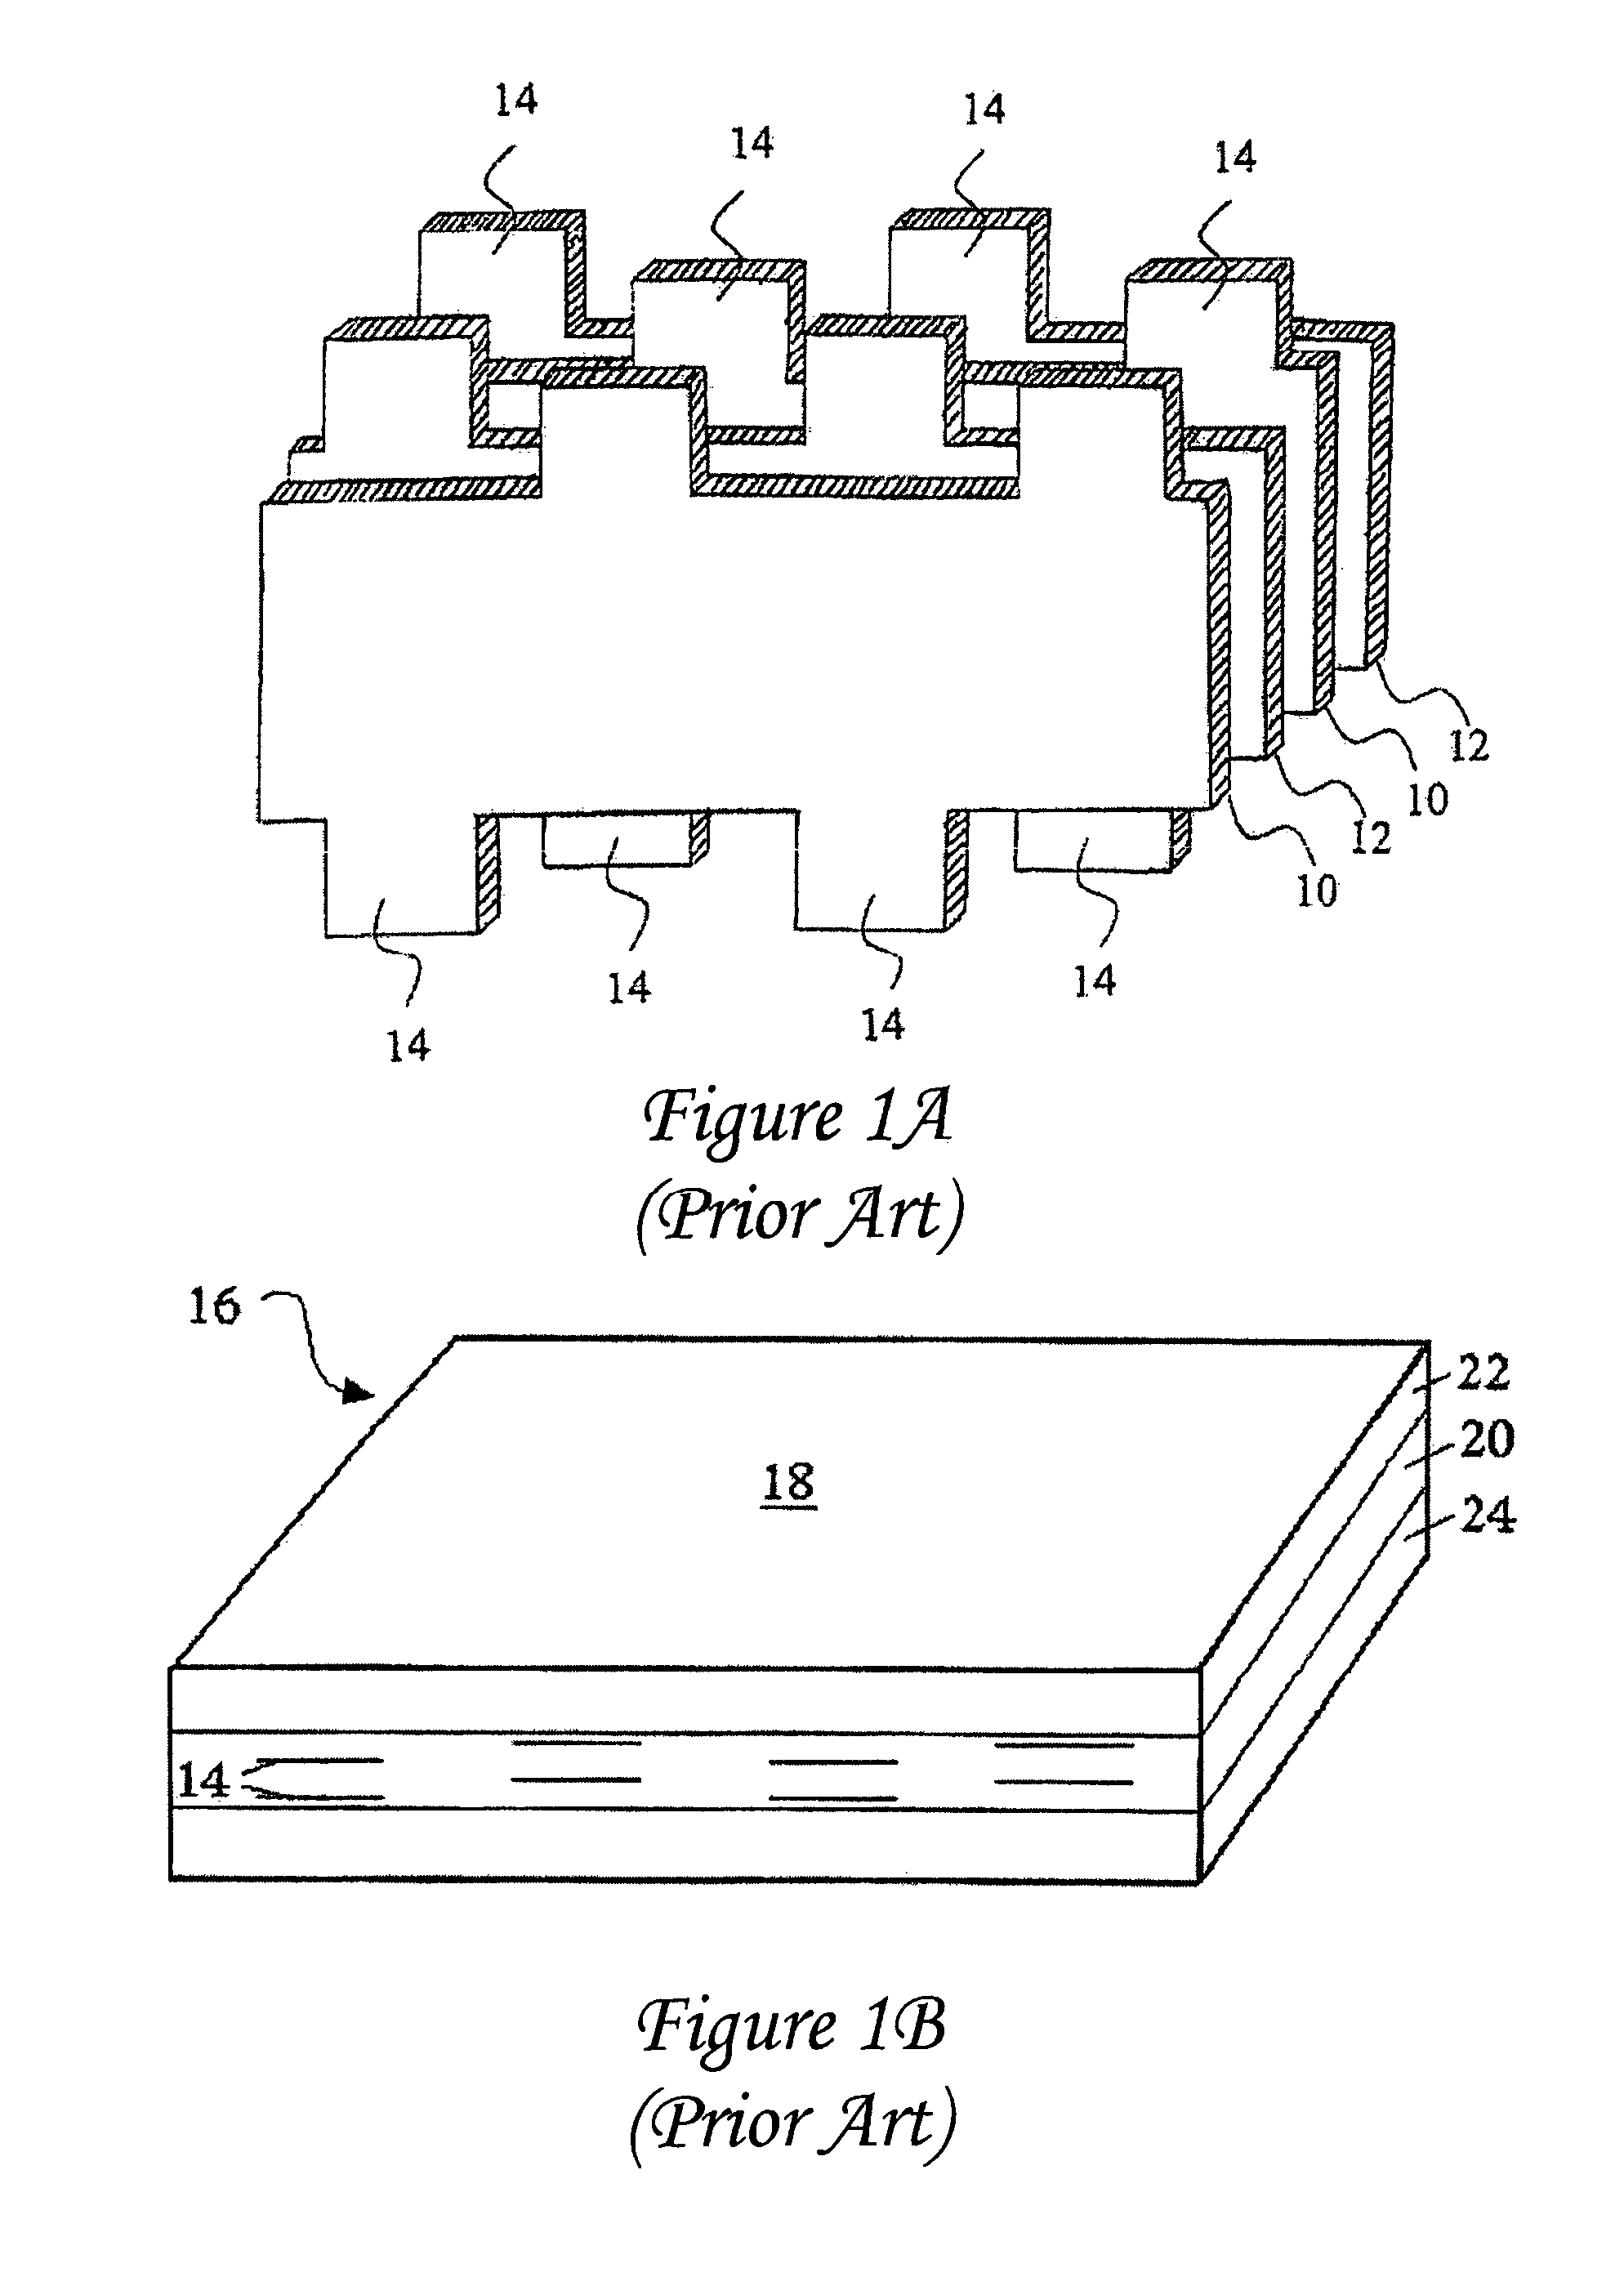 Plated terminations and method of forming using electrolytic plating